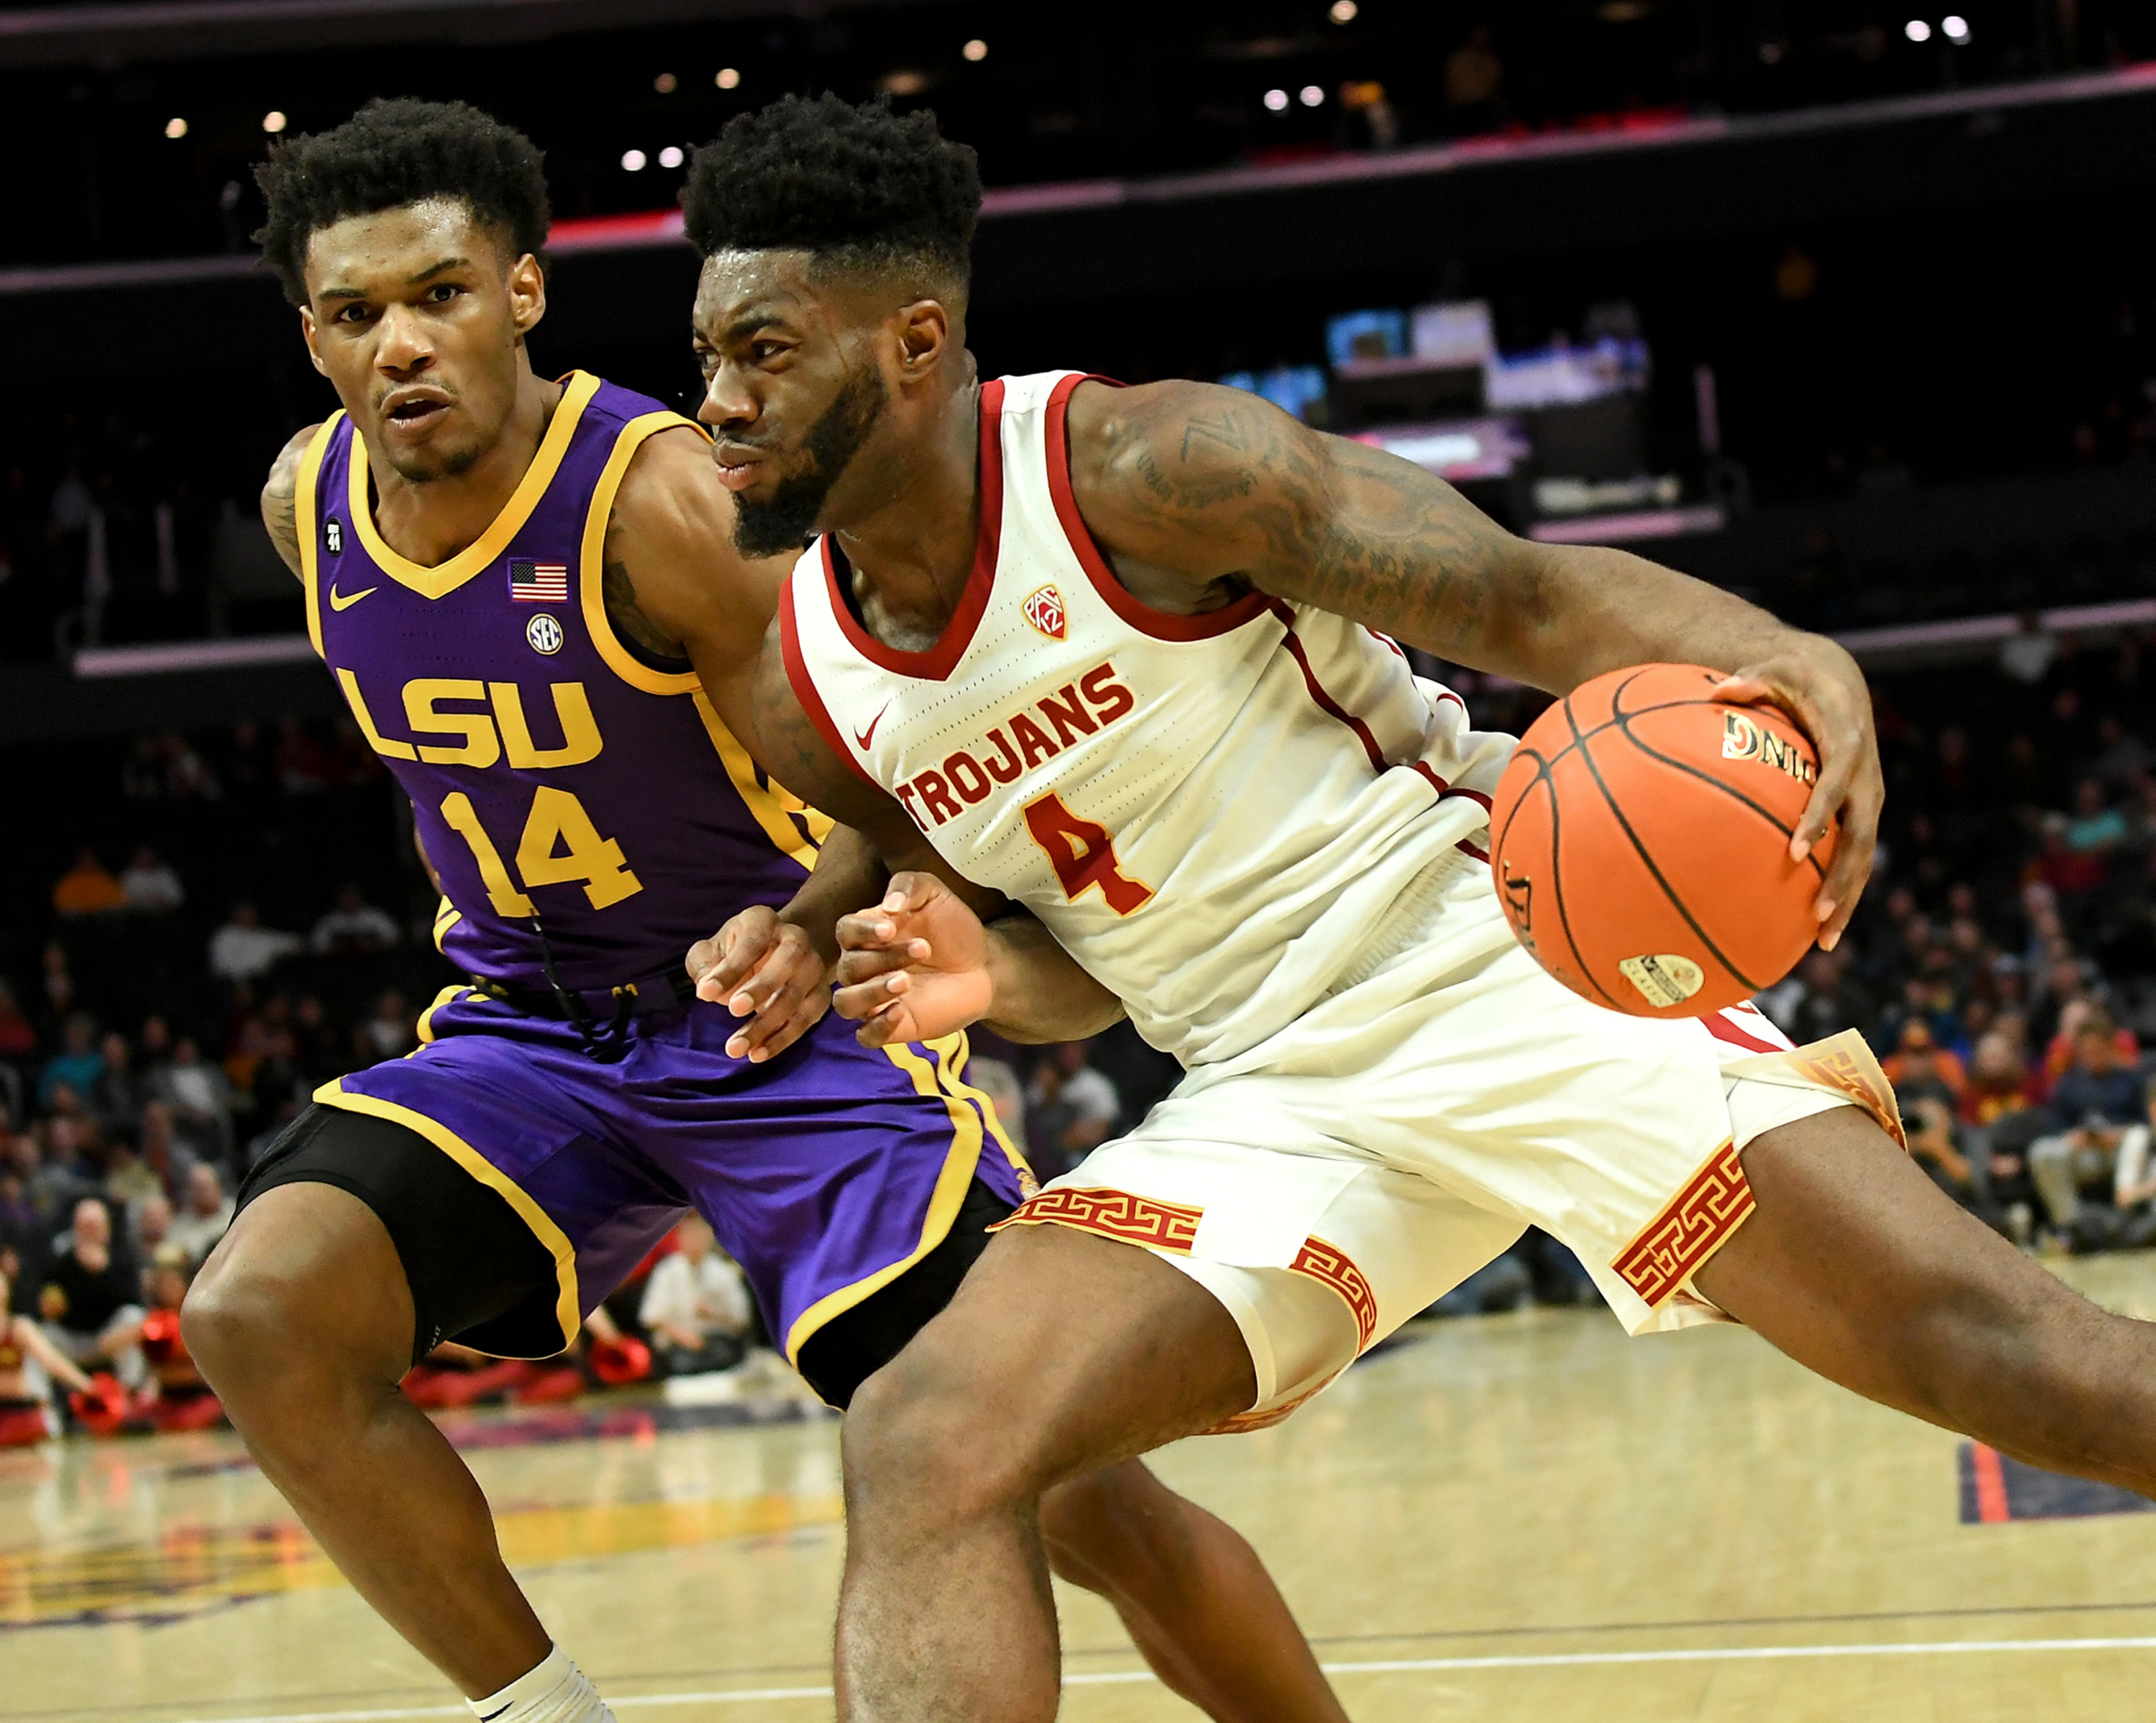 USC basketball Takeaways from Trojans close loss to surging Arizona